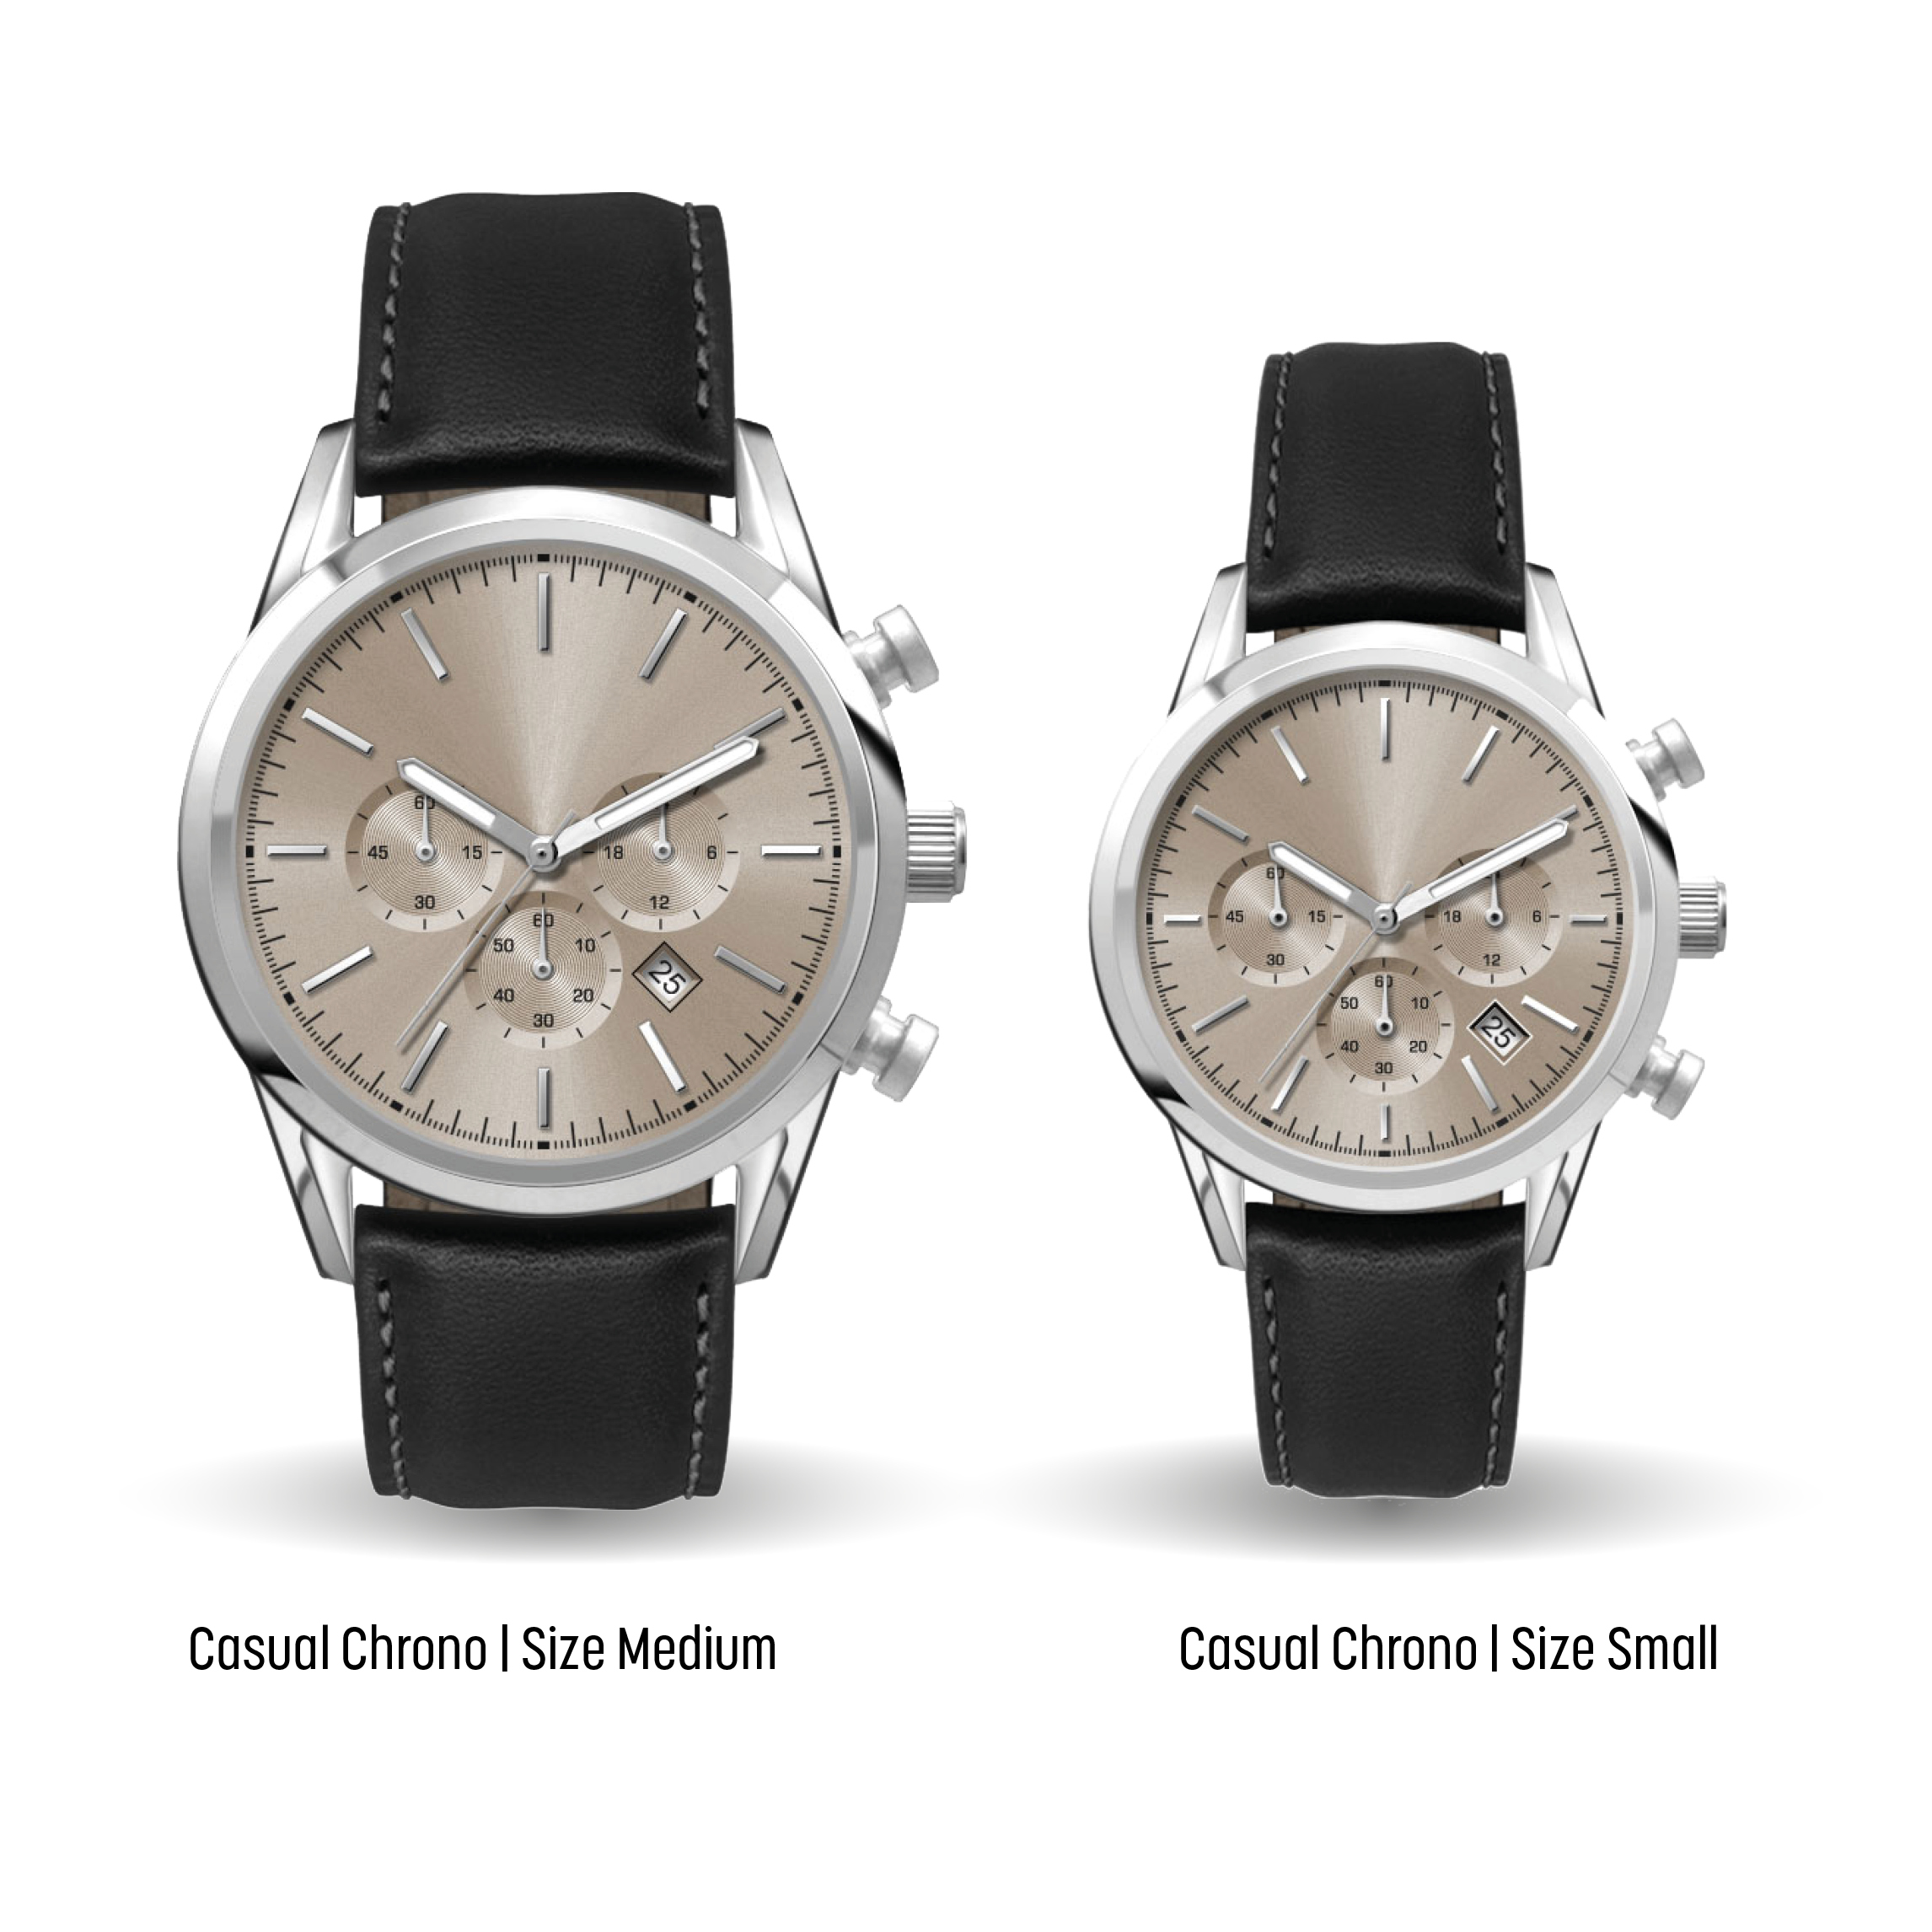 Customizable CASUAL CHRONO watches by Watch Branding. Perfect for celebrating company heritage, rebranded logos and more